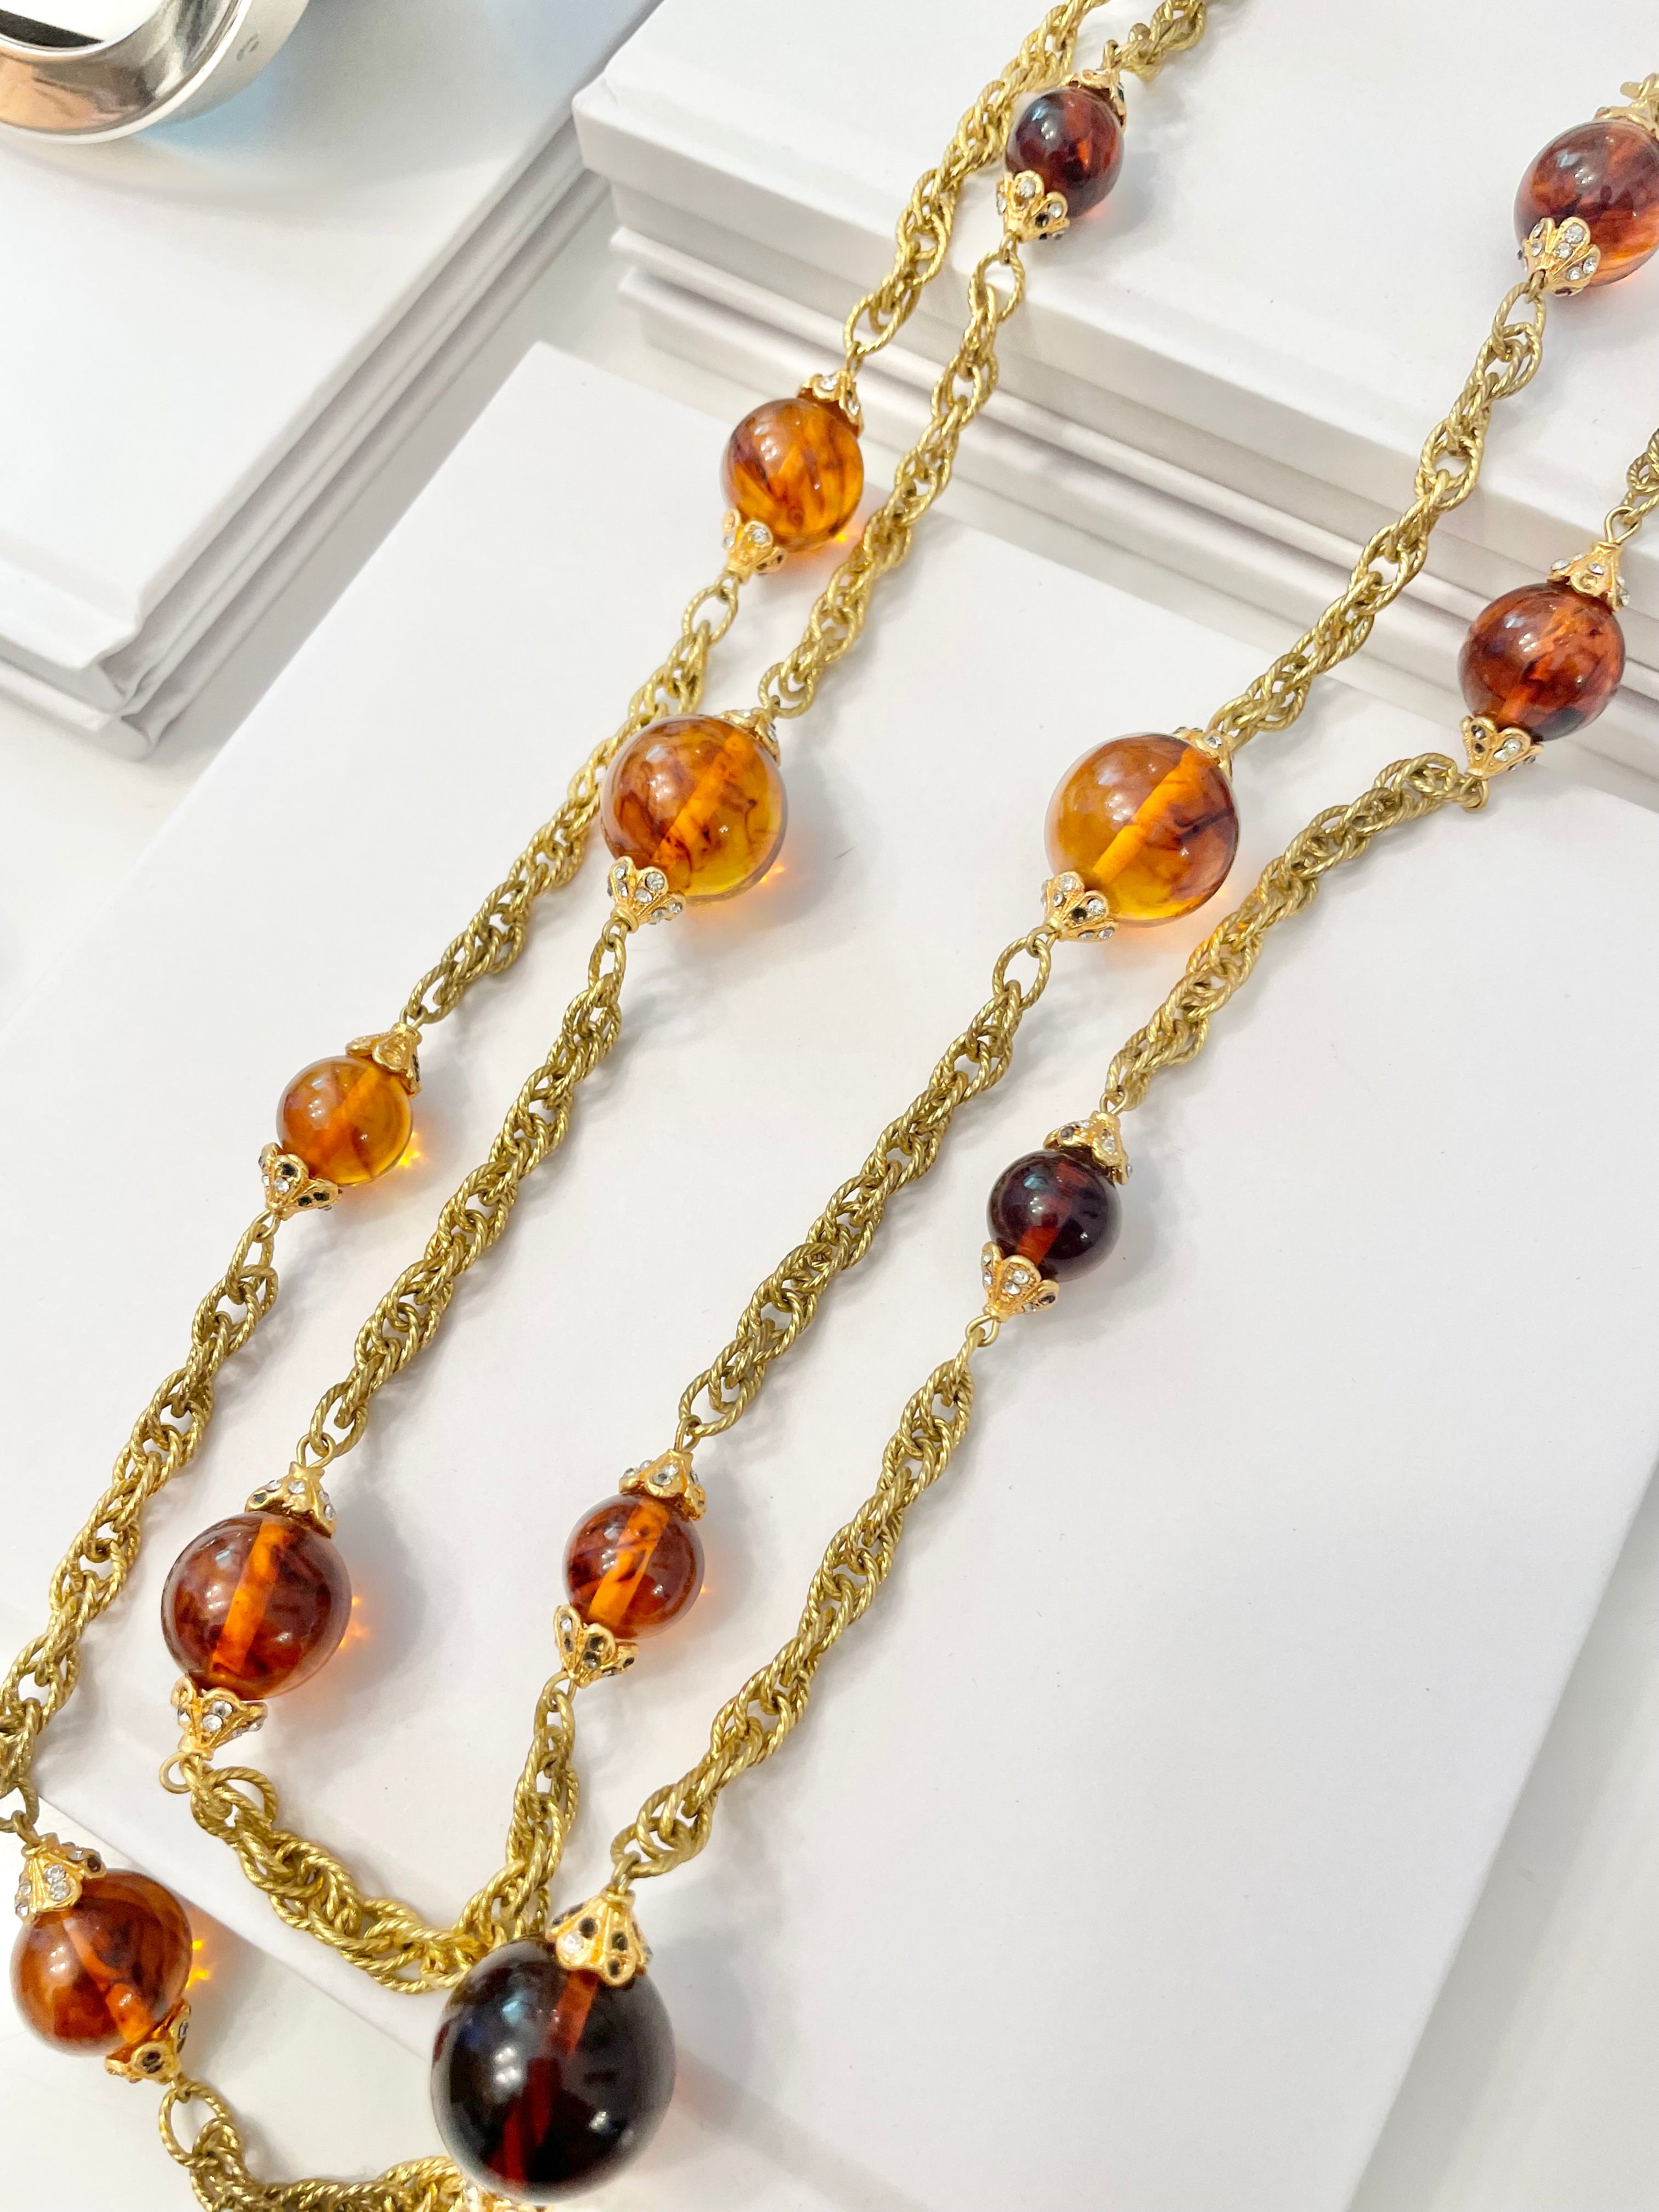 This lovely long, gold and tortoise glass beaded necklace is a truly classy piece. So lovely